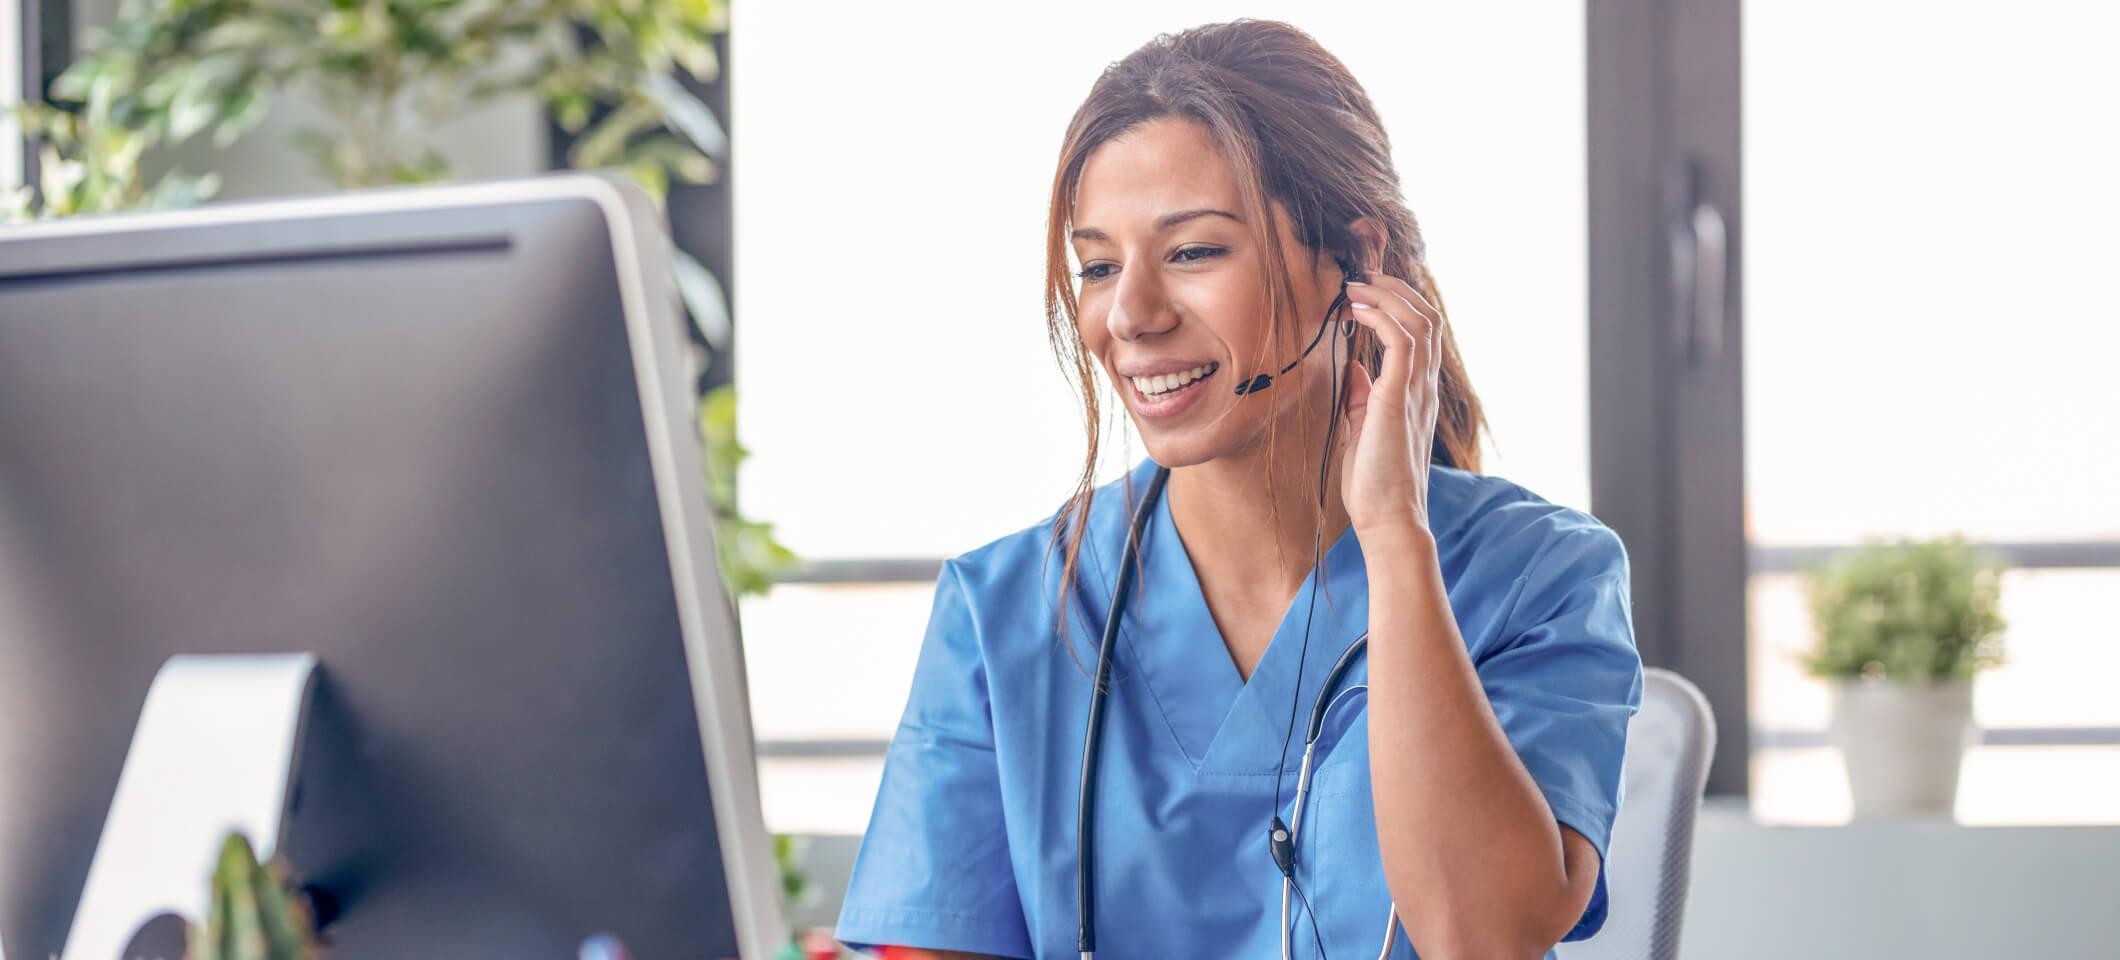 Physician applies telehealth best practices while speaking with a patient during a video call appointment